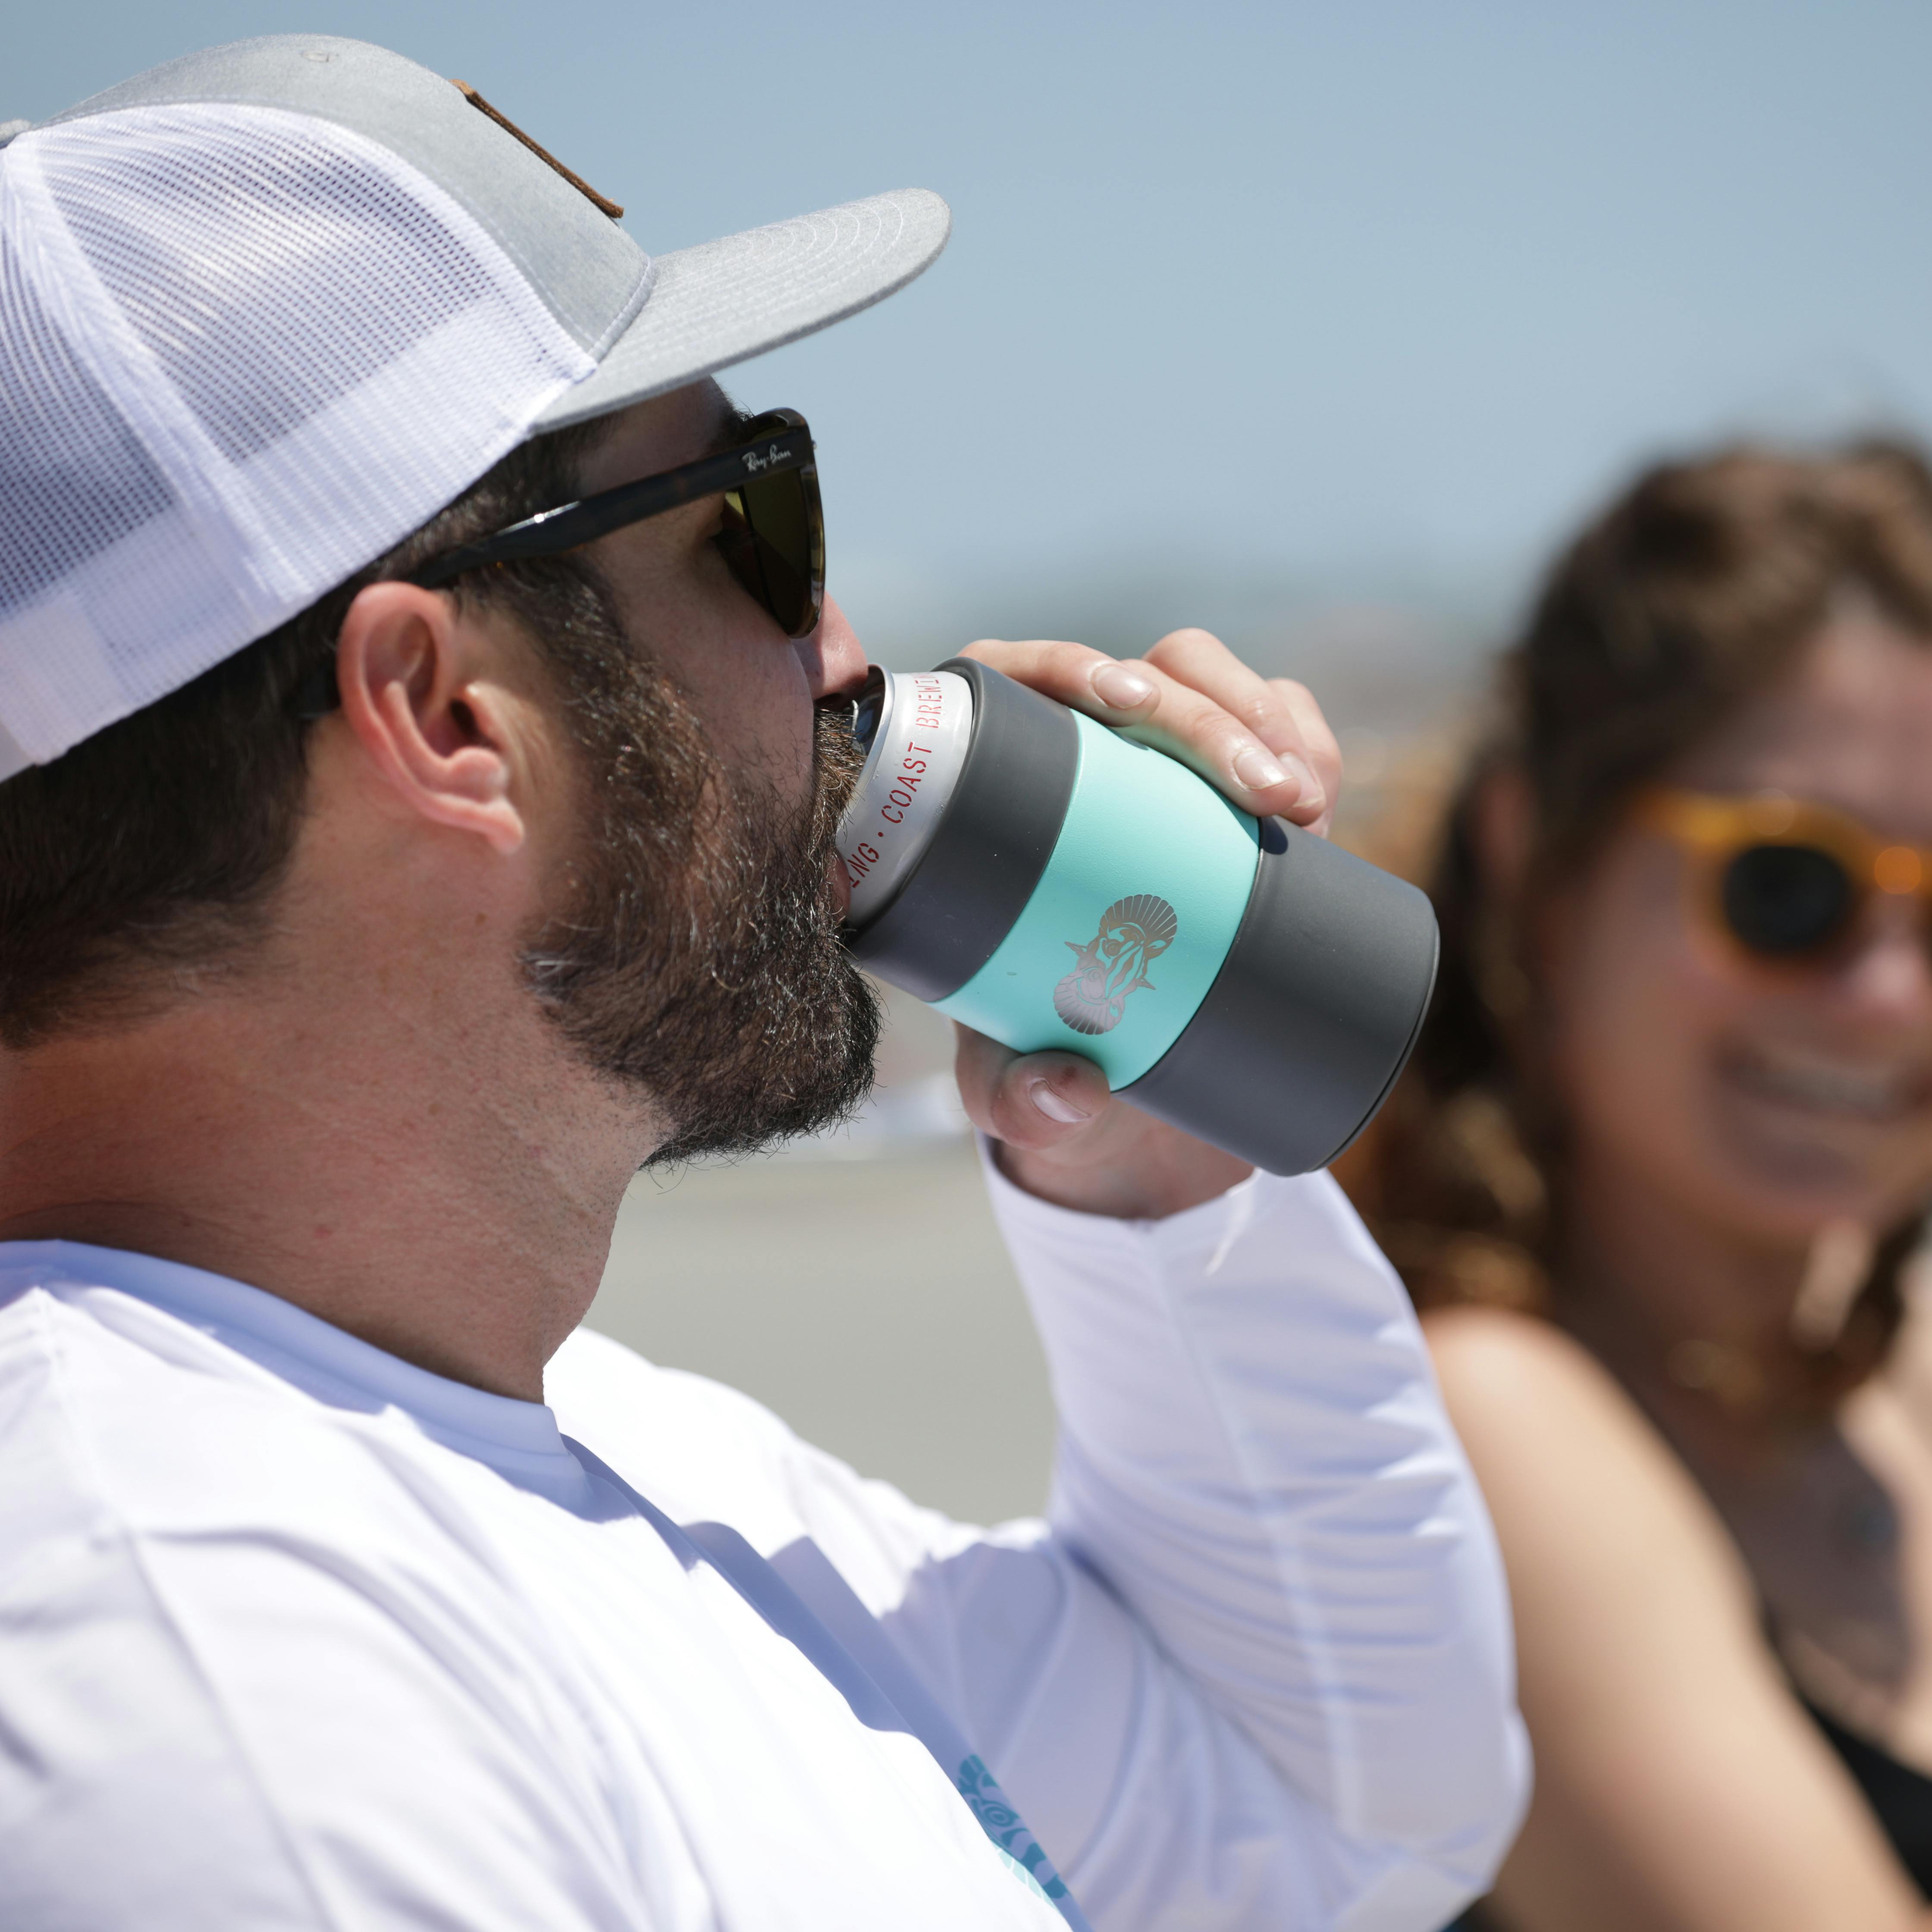 https://huckberry.imgix.net/spree/products/597132/original/yi3bGGXNpG_toadfish-outfitters_the_non-tipping_can_cooler_gifts_6_original.jpg?auto=format%2C%20compress&crop=top&fit=clip&cs=tinysrgb&ixlib=react-9.5.2